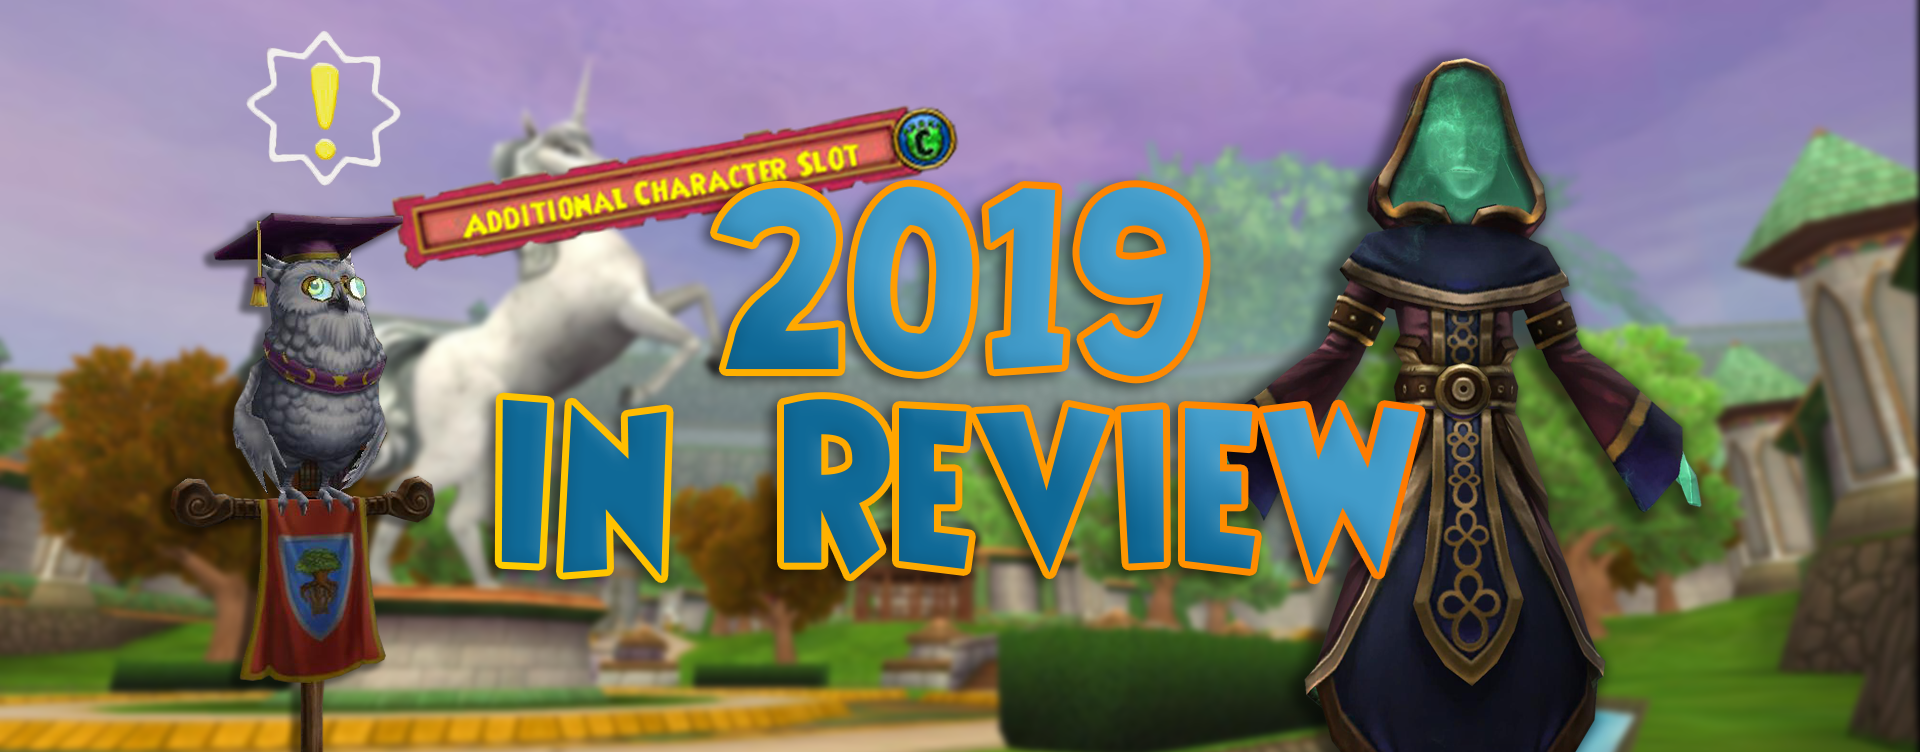 Wizard101 Review